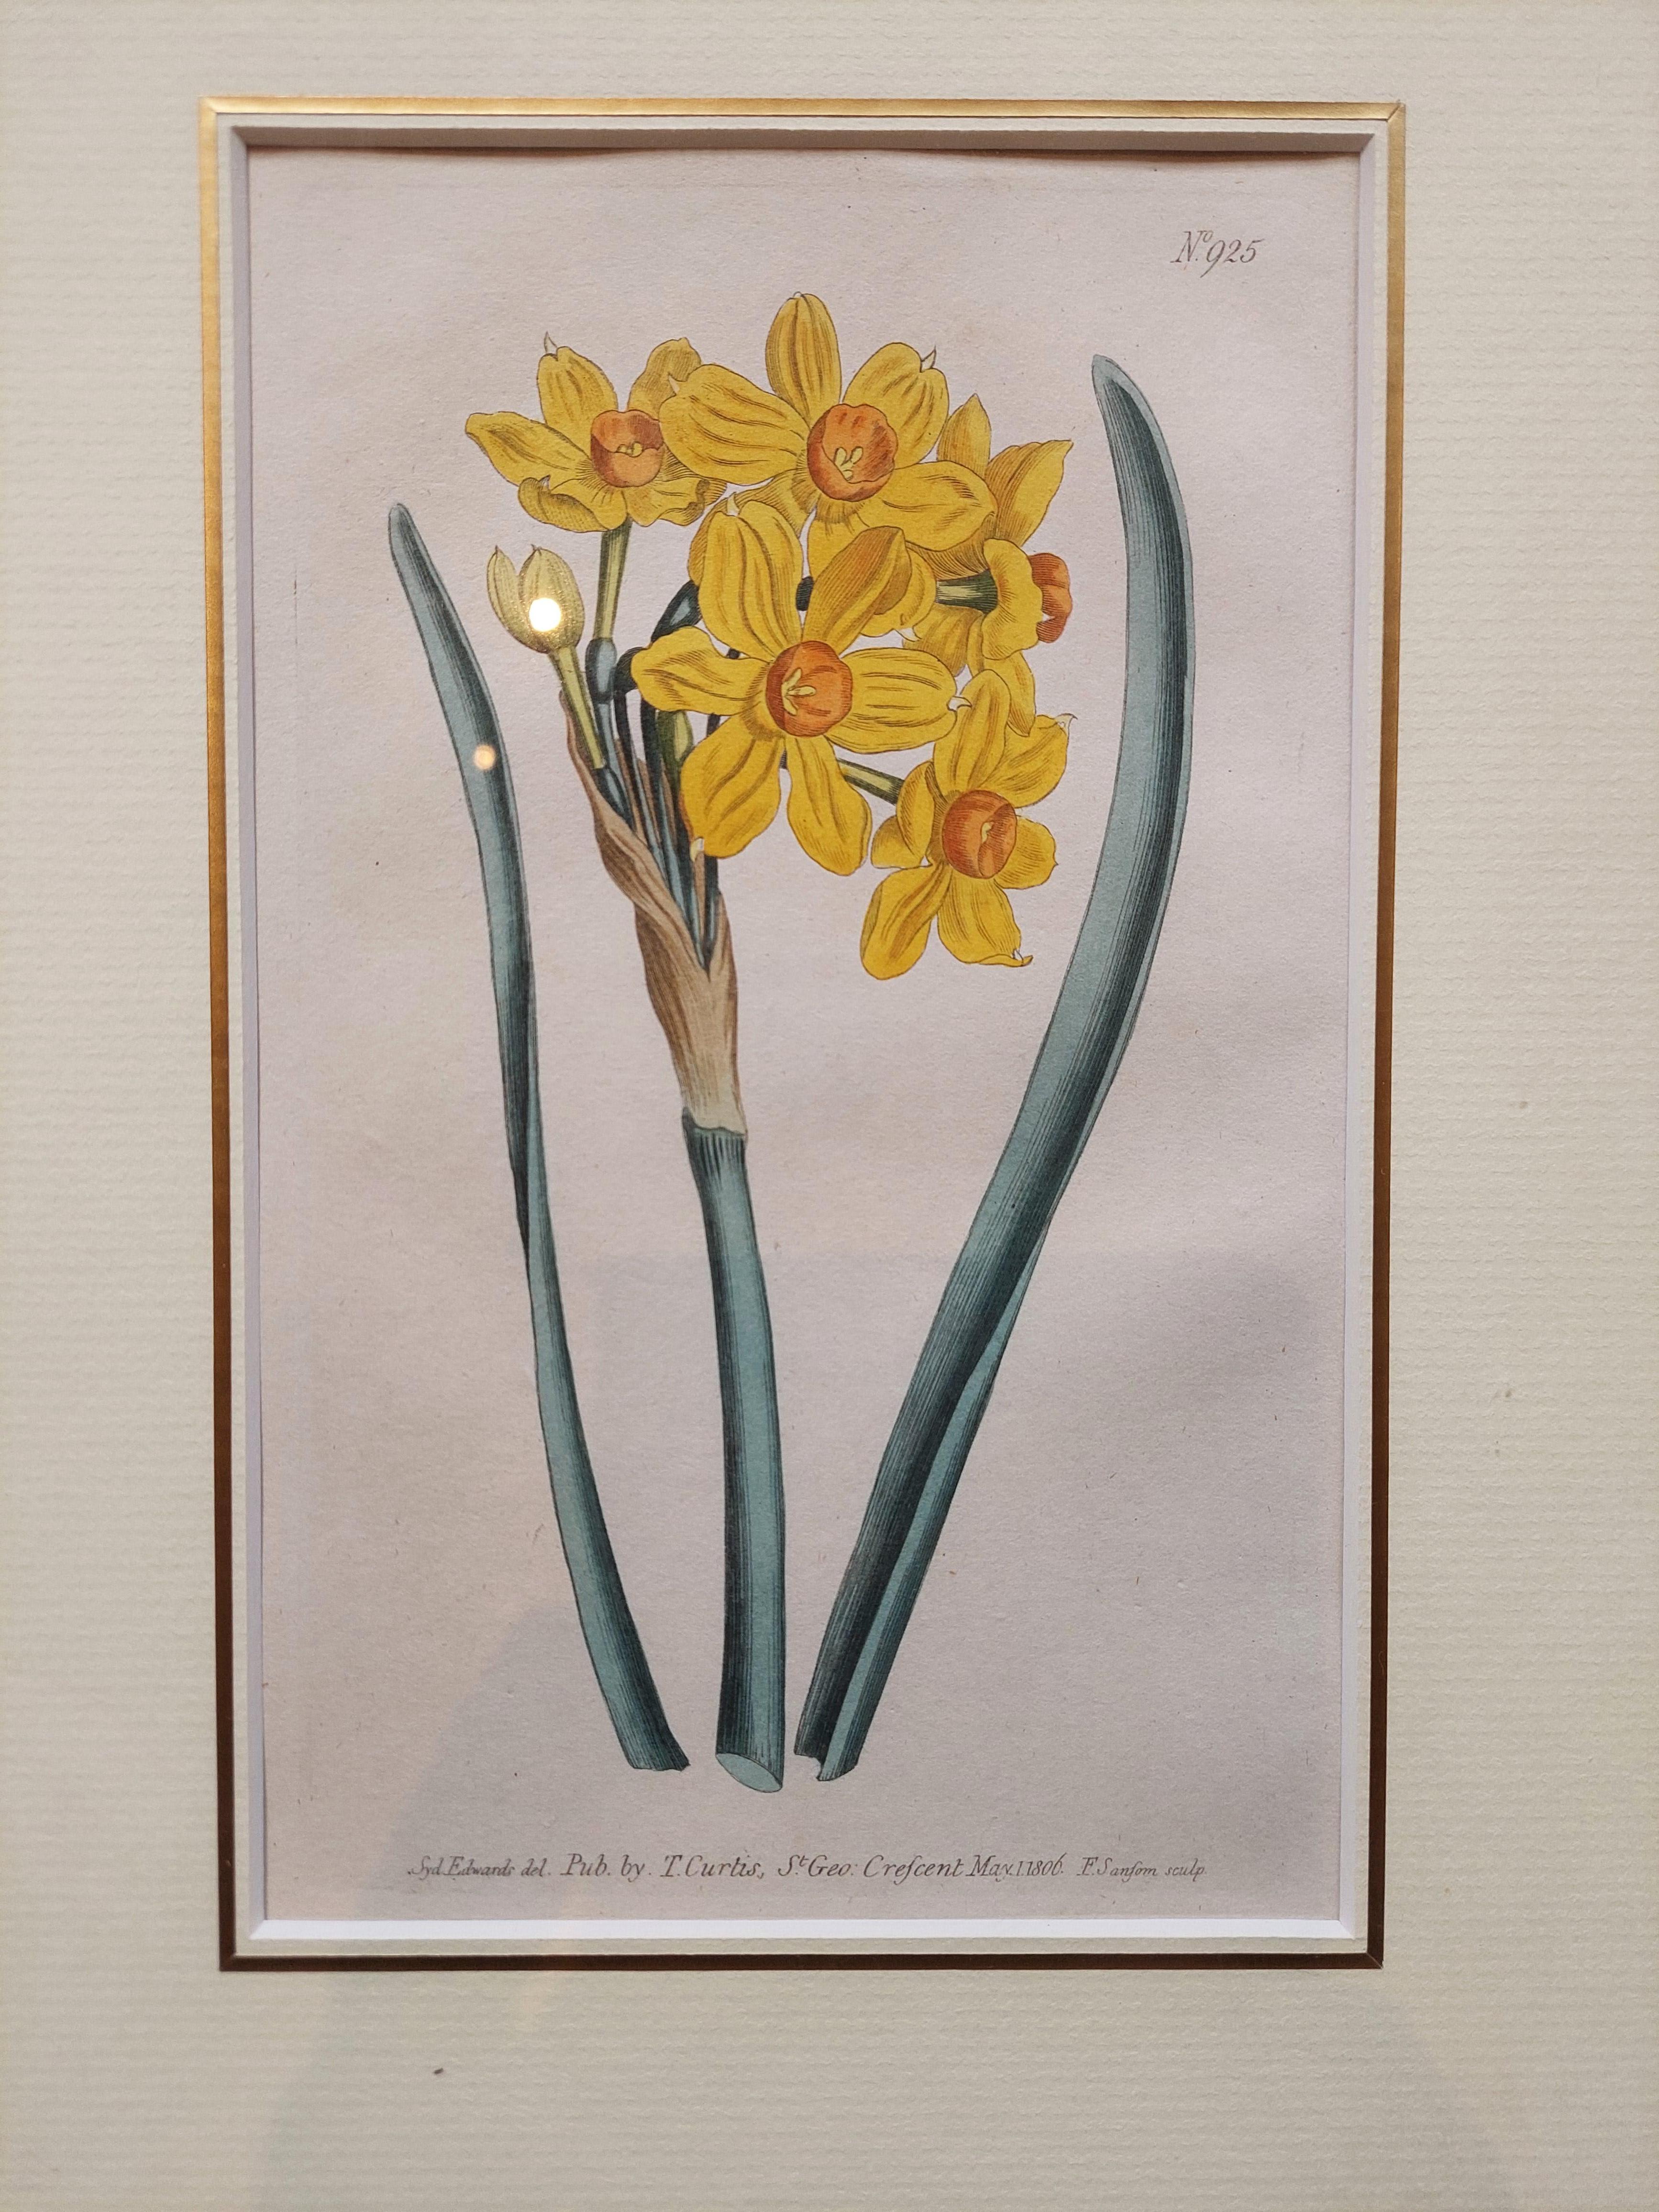 Antique botany print of Narcissus Tazetta or Polyanthus Narcissus by William Curtis. 

William Curtis began publication of the Botanical Magazine in February 1787 and continued almost without interruption for 160 years. After Curtis edited the first